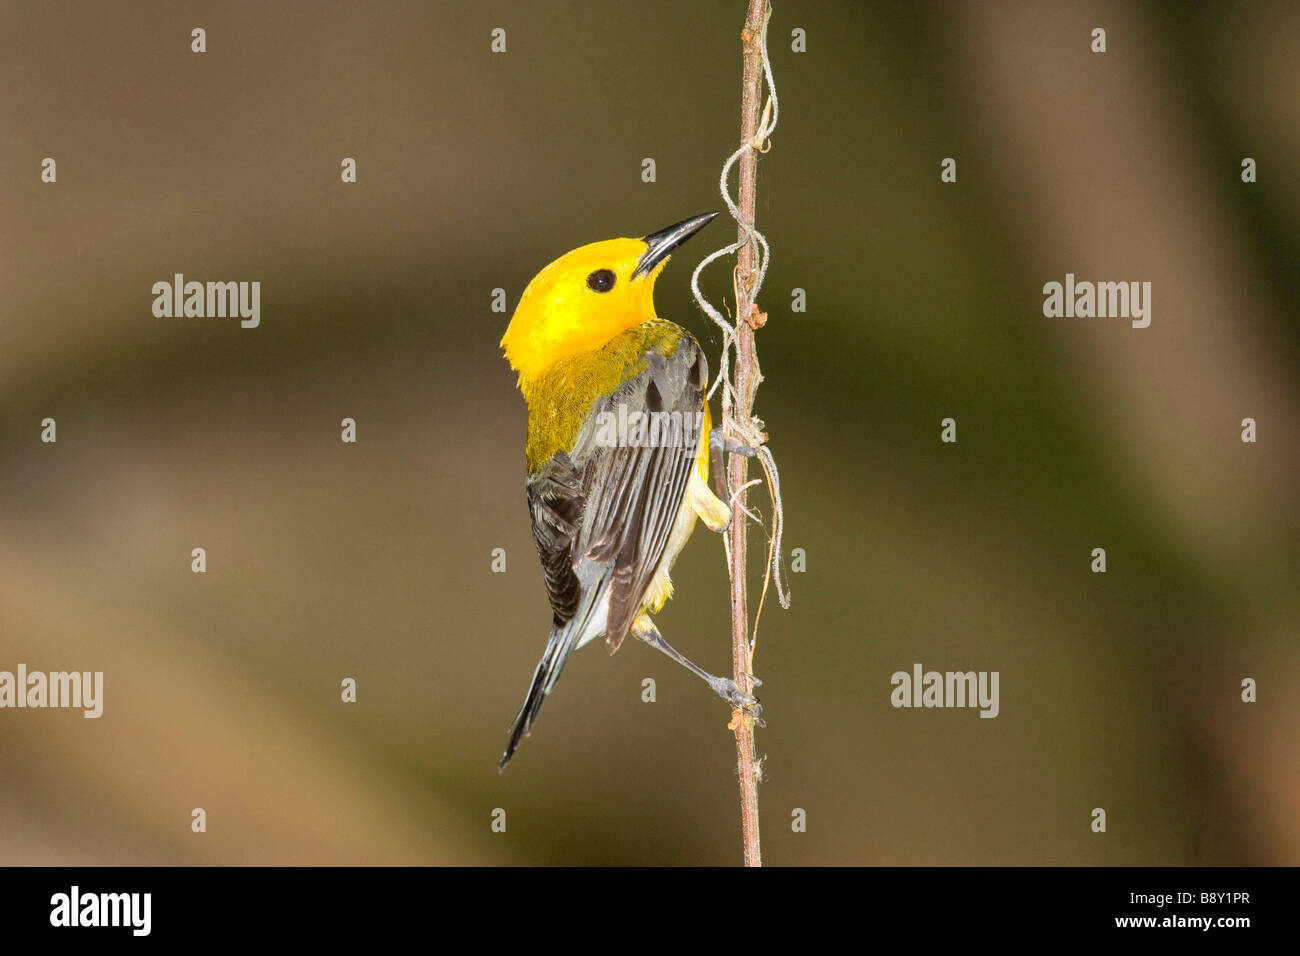 Close-up of a Prothonotary warbler (Protonotaria citrea) perching on a branch Stock Photo